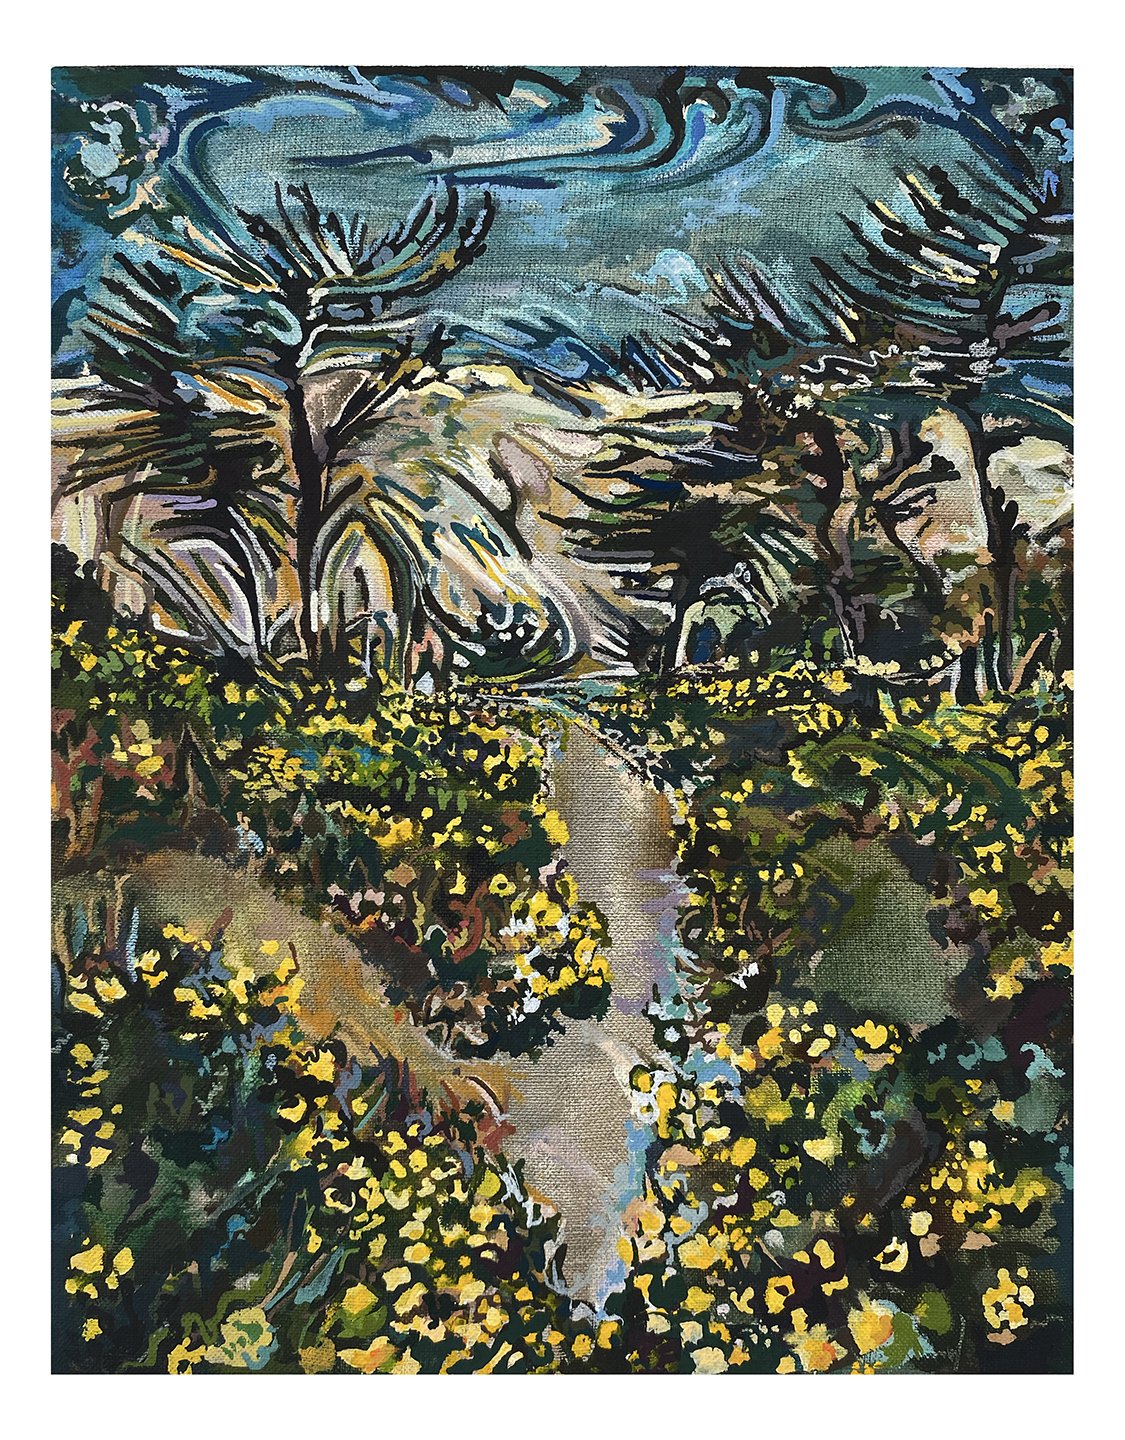  Maria Calandra, Point Reyes with Wild Flowers, 2021, acrylic on linen over panel, 10 x 8 inches 